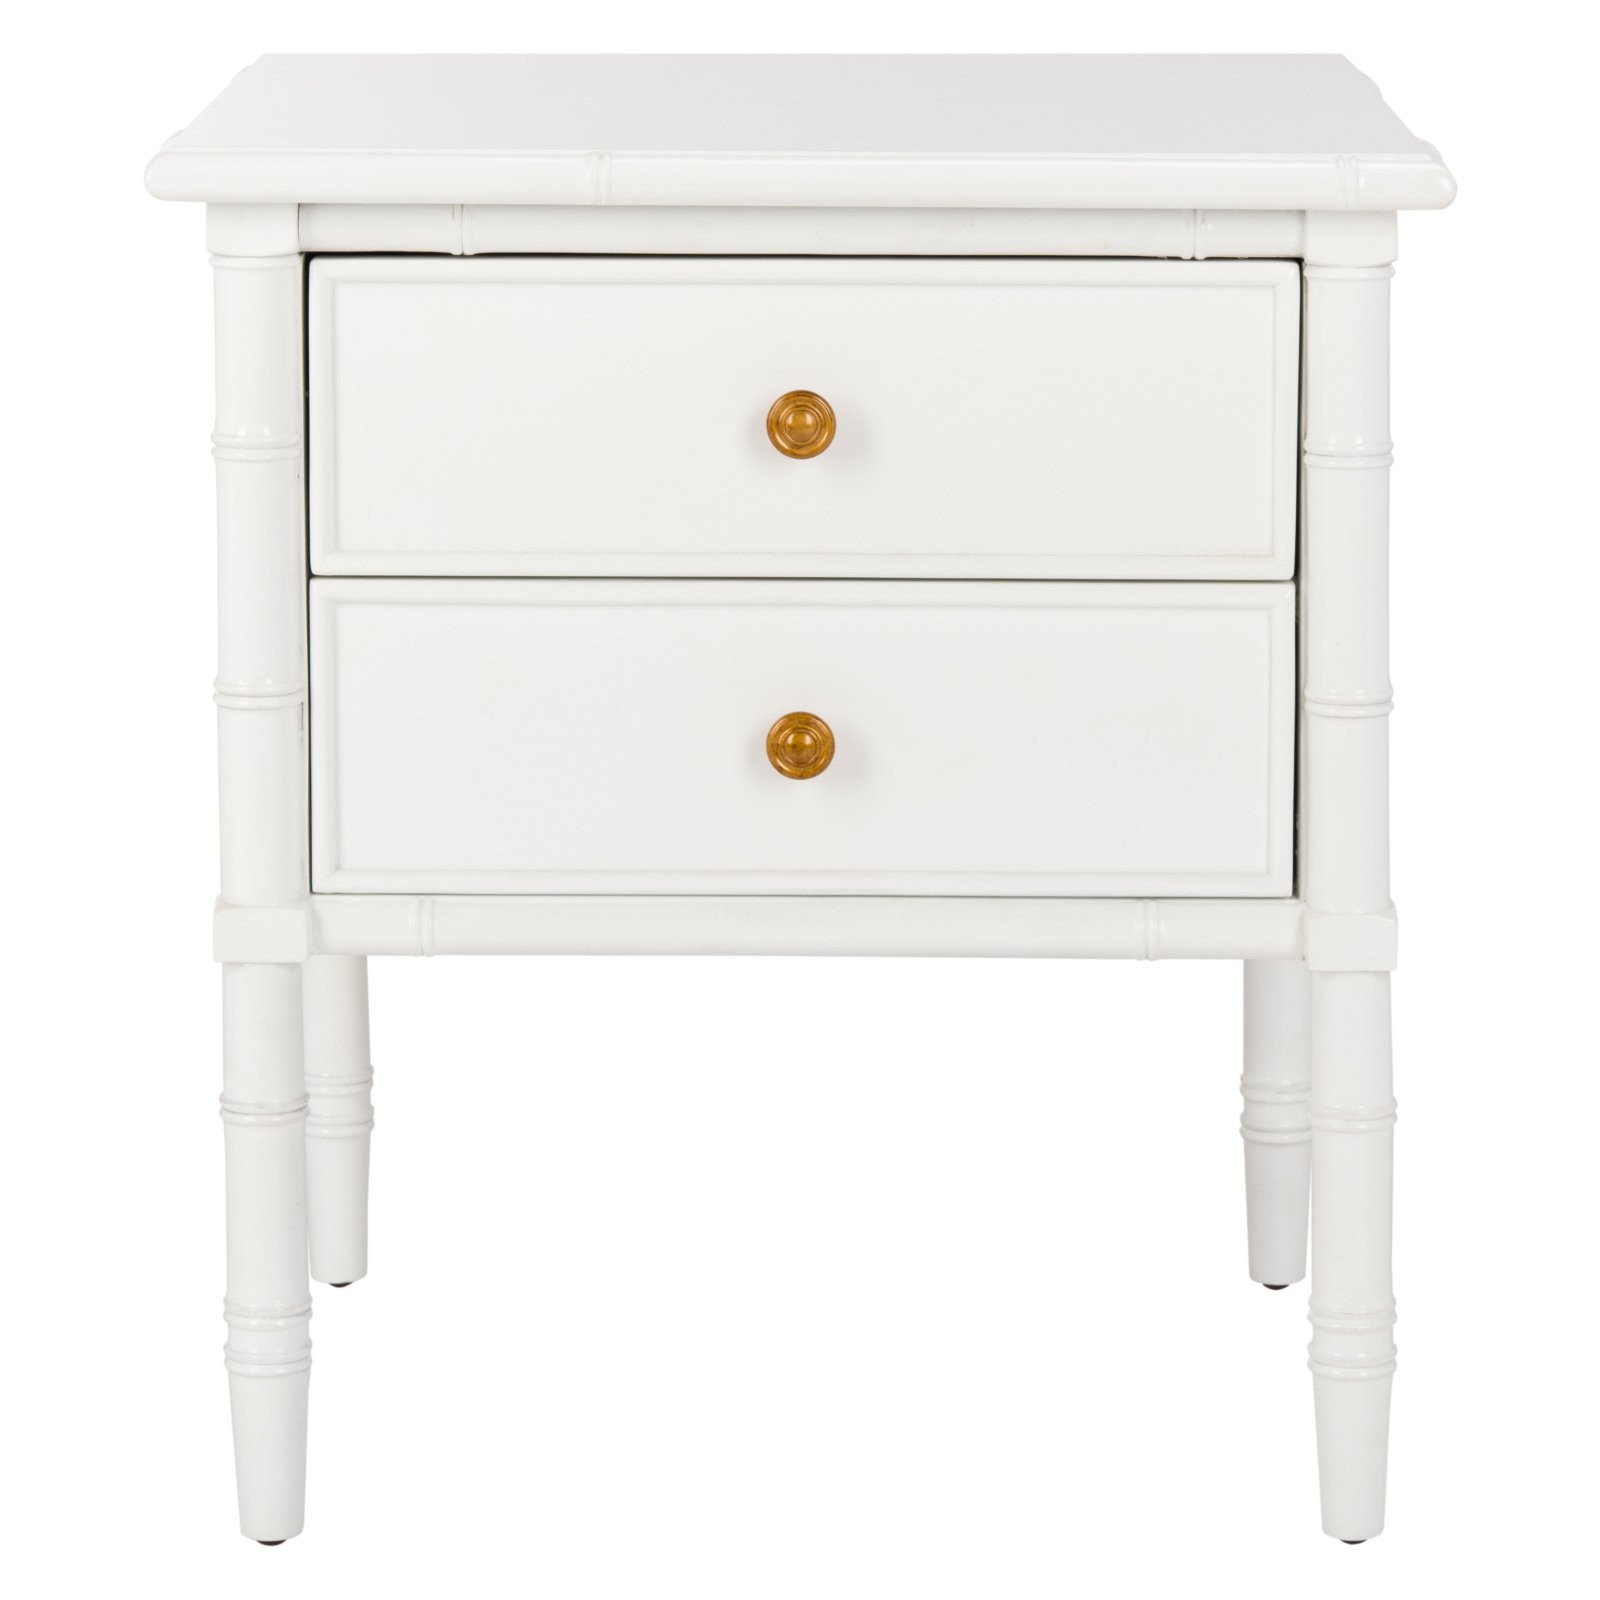 White Bedroom End Tables Awesome Safavieh Mina Modern Coastal 25h In 2 Drawer Bamboo